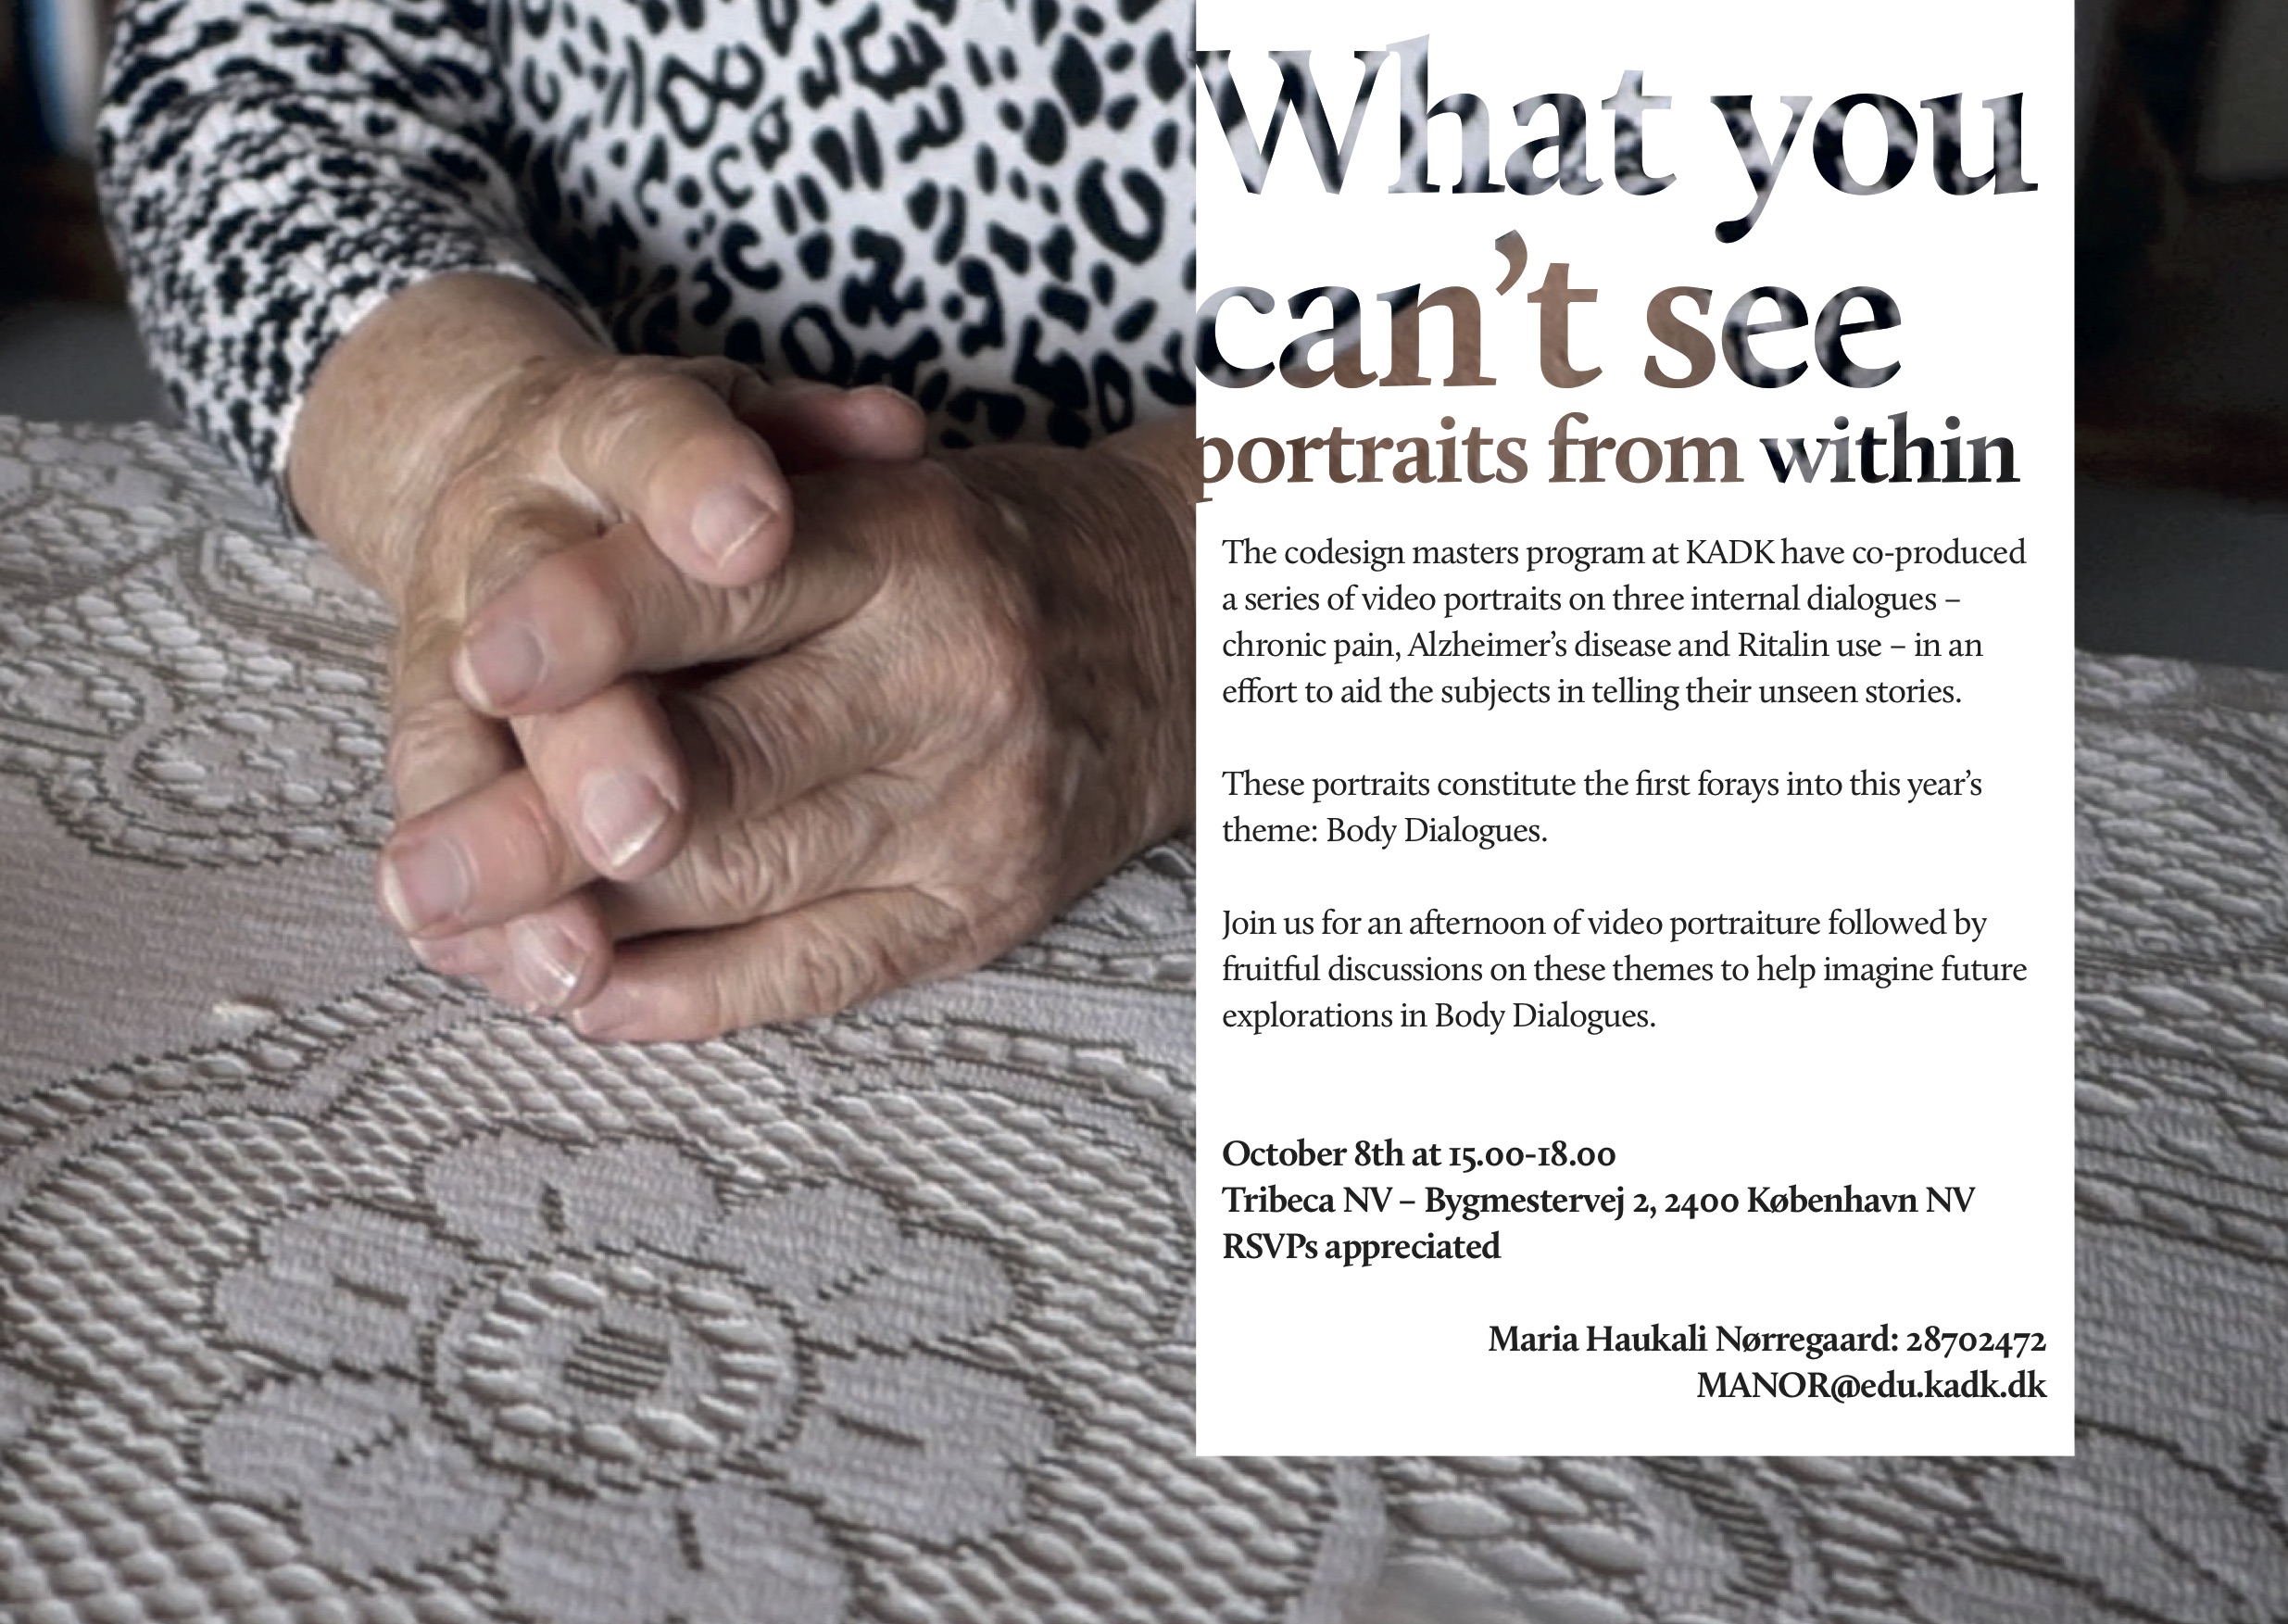 invitation for event: "What you can't see: Portraits from within"